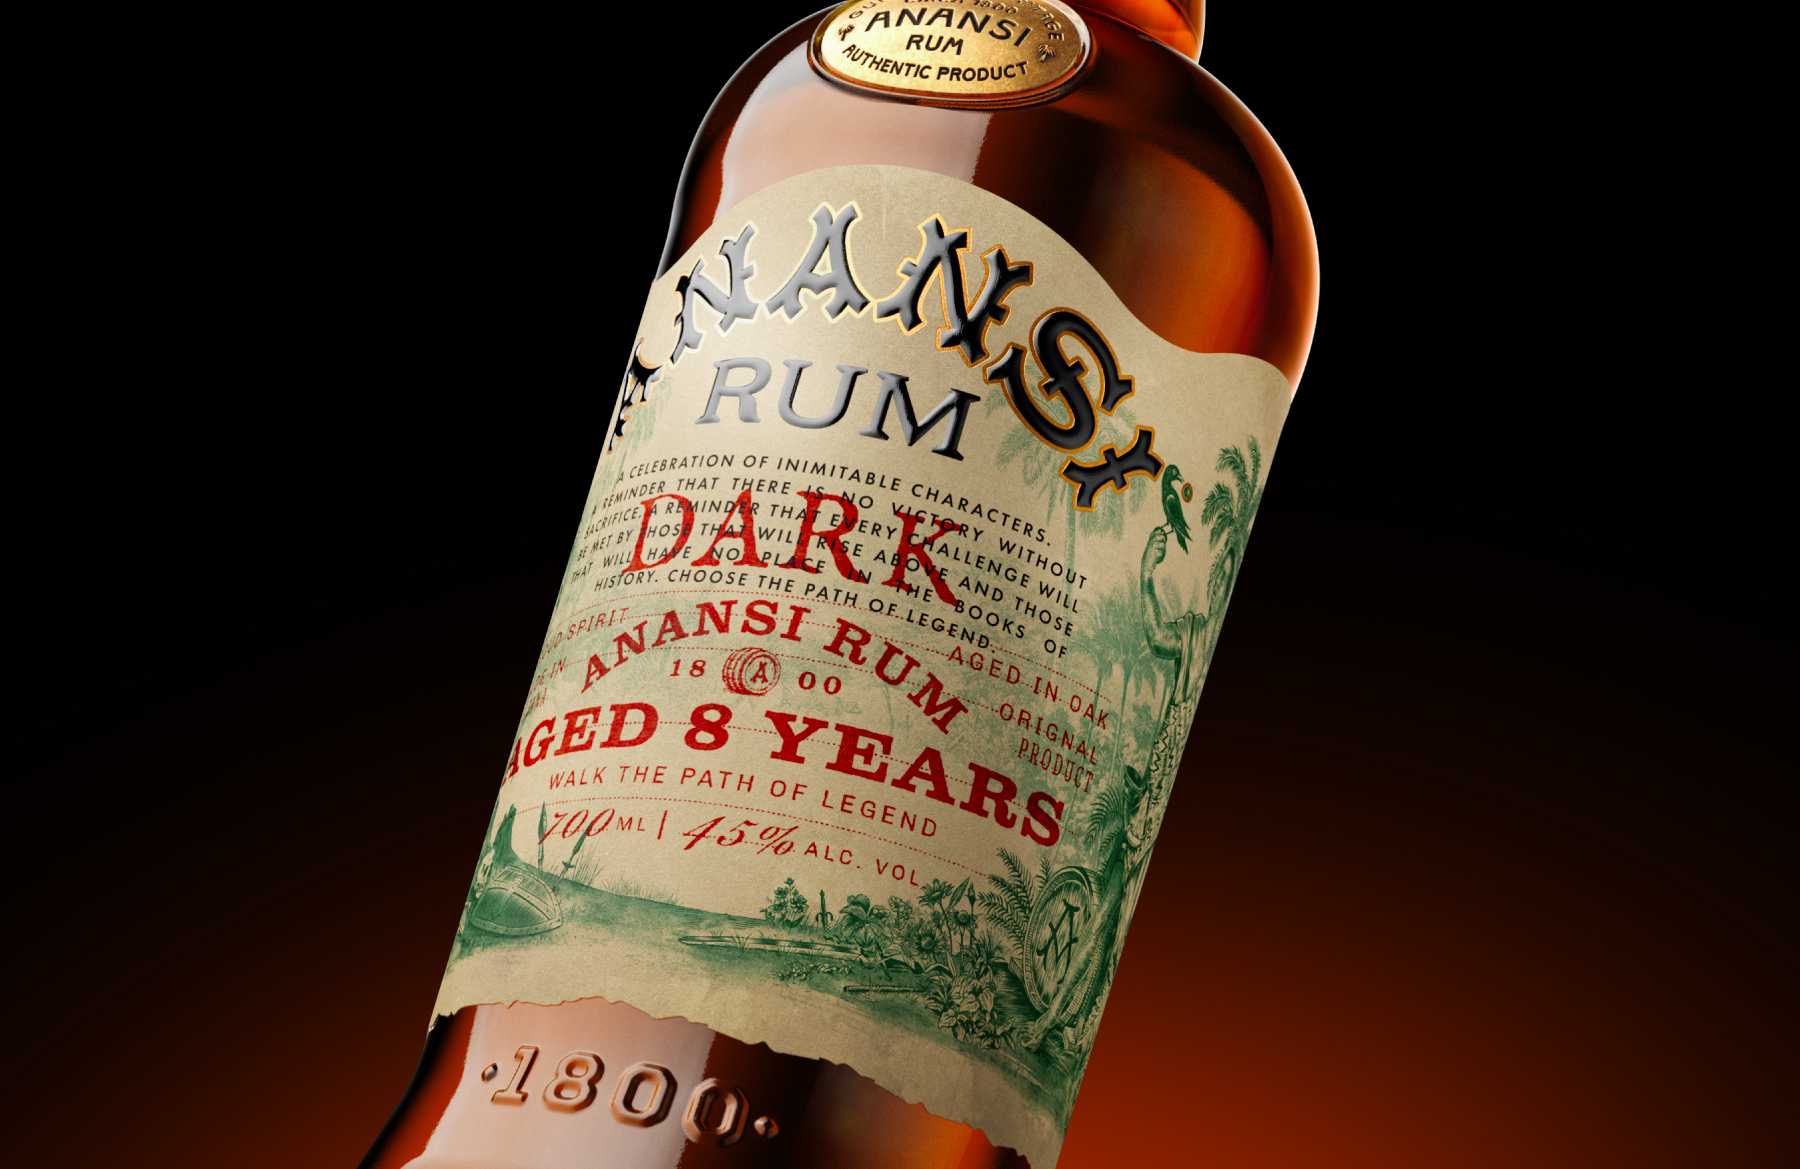 Anansi Rum: From Defiance to Freedom